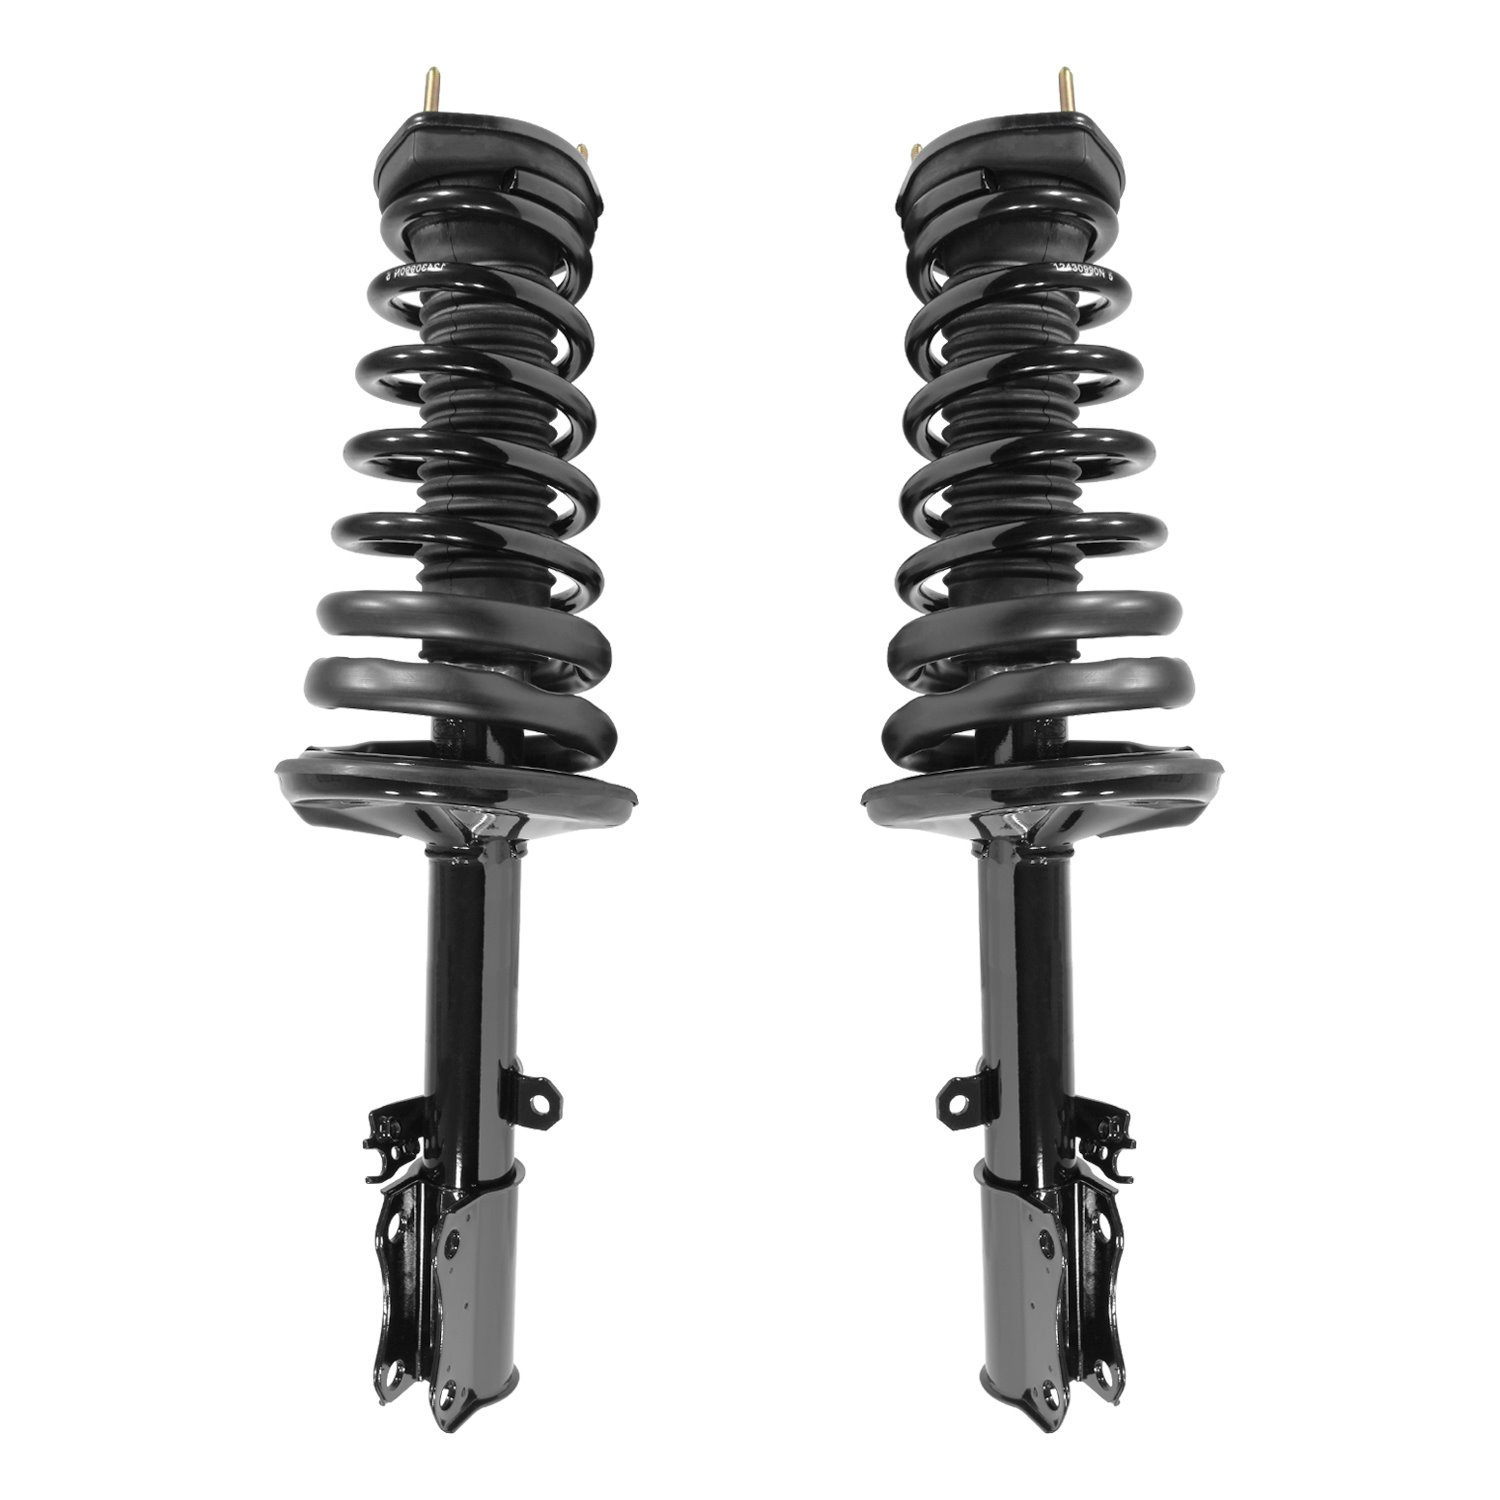 2-15341-15342-001 Suspension Strut & Coil Spring Assembly Set Fits Select Lexus ES300, Toyota Camry